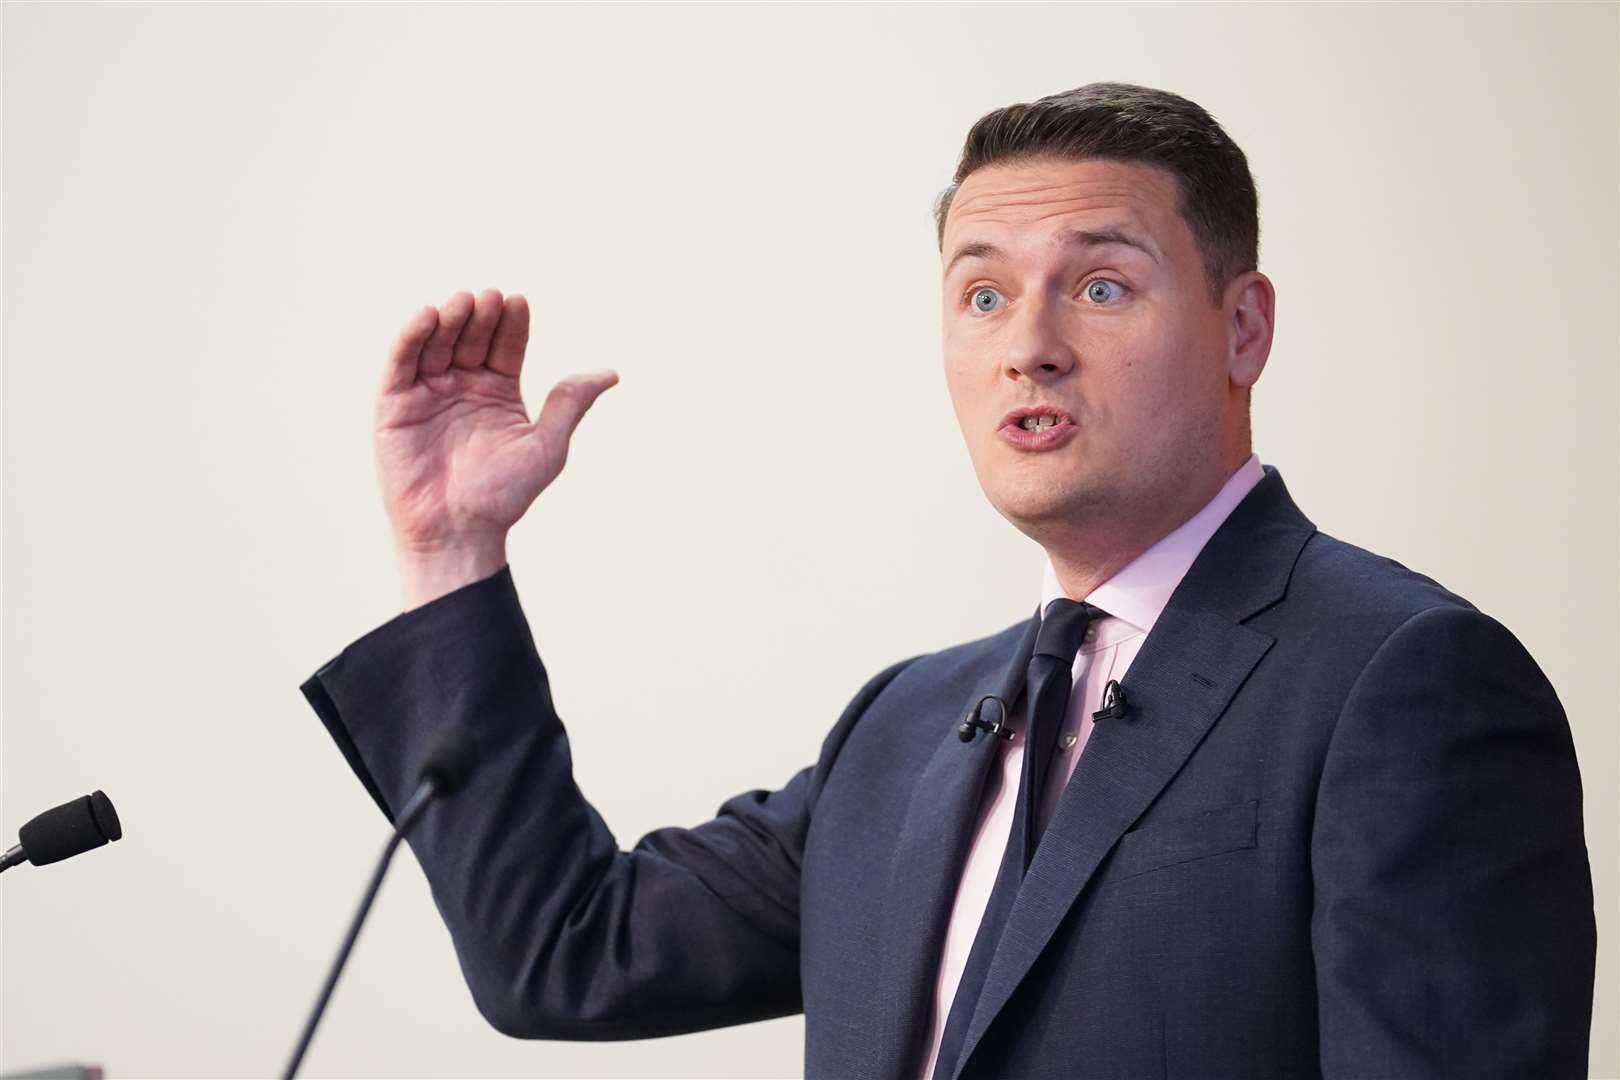 Shadow health secretary Wes Streeting said the NHS had ‘never been in a worse state’ after ’14 years of Conservative neglect’ (Stefan Rousseau/PA)